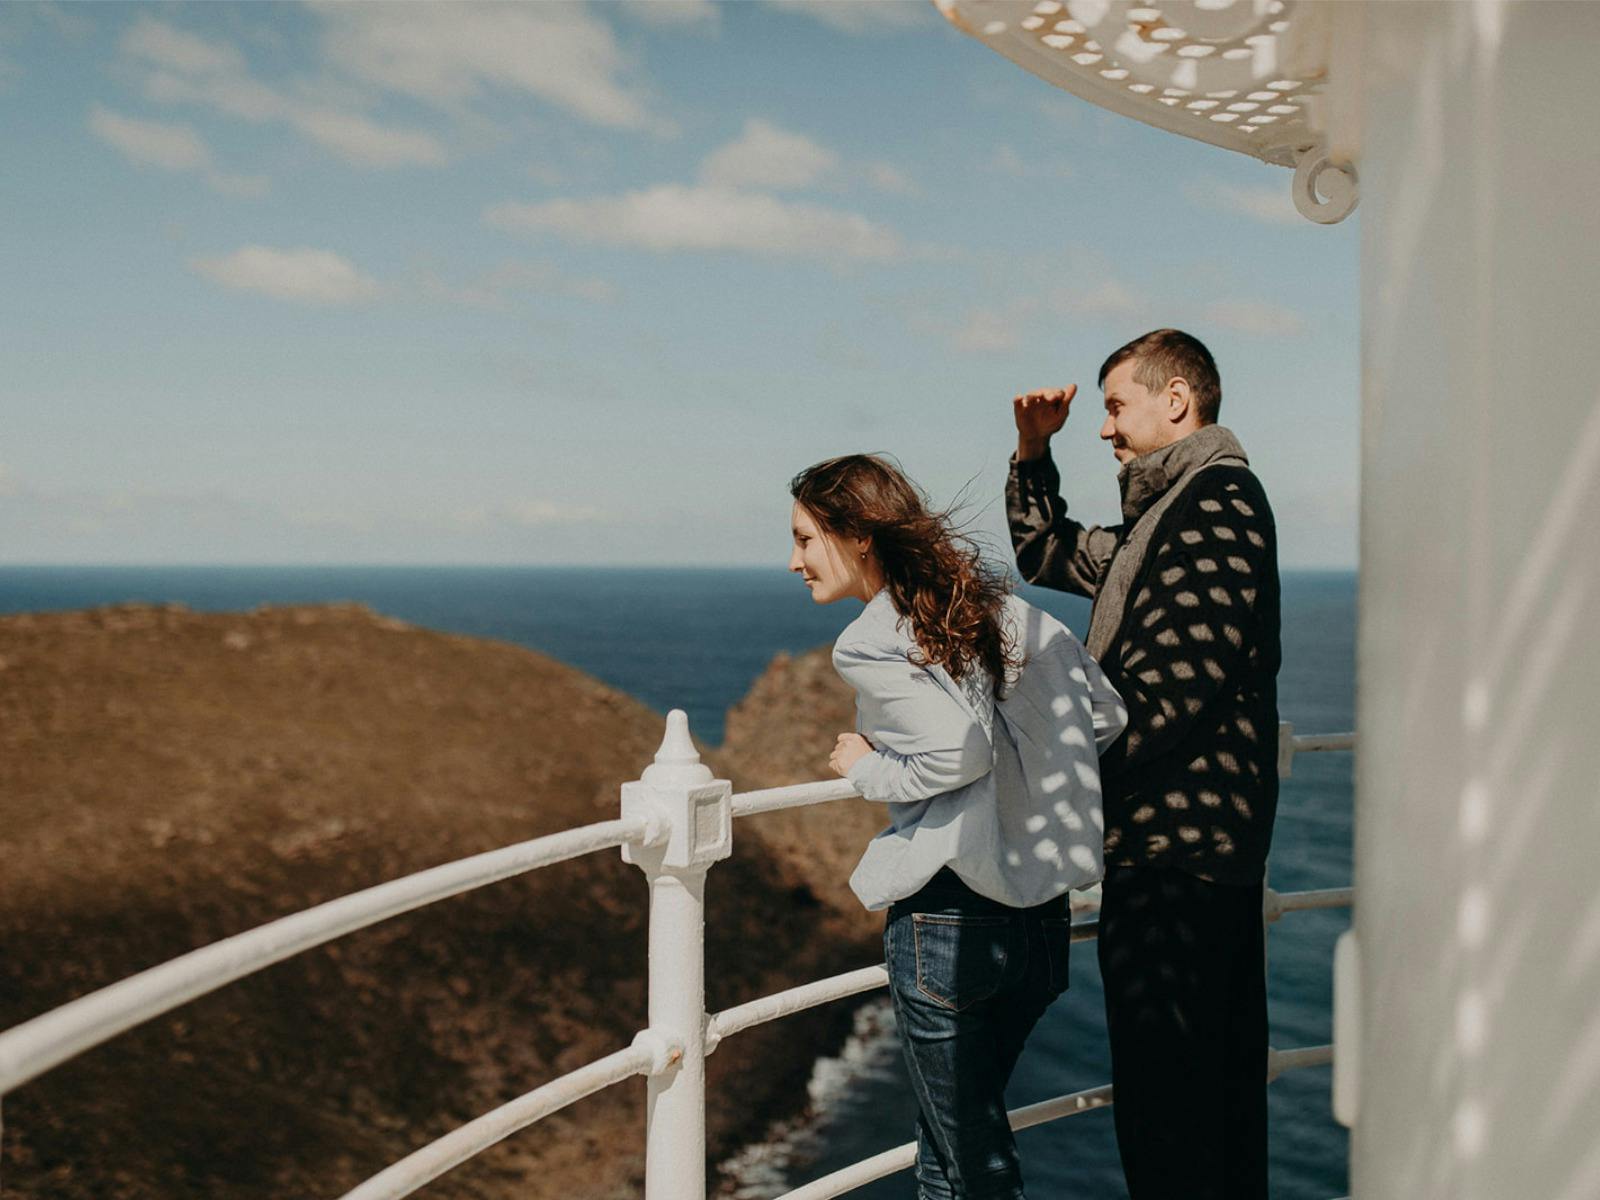 Couple on top of lighthouse looking at mountains and ocean beyond.